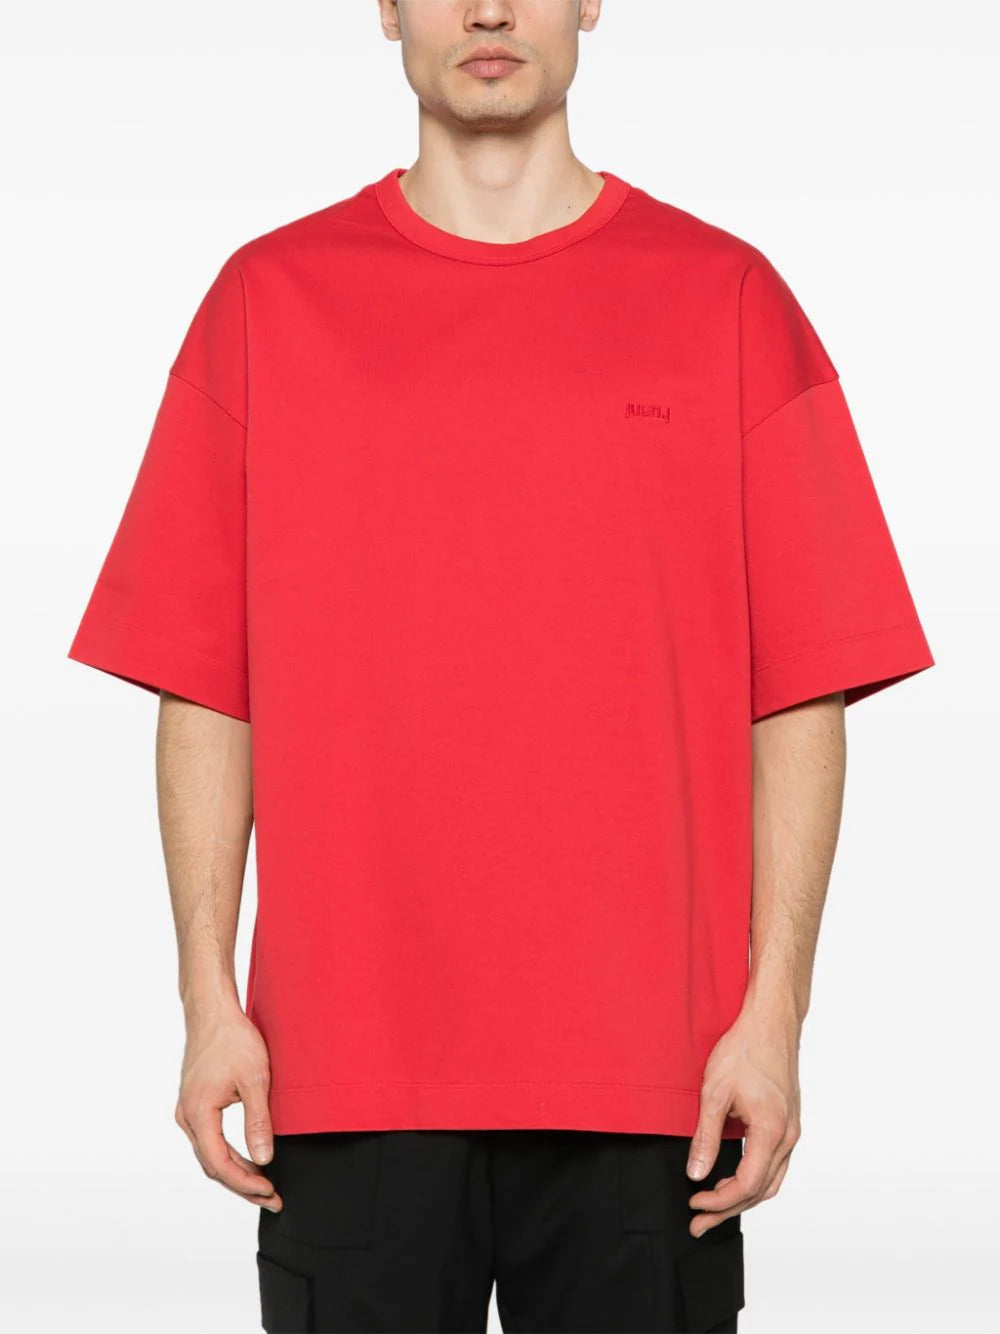 Juun.J-Semi-Over-Fit-Graphic-T-Shirt-Red-4